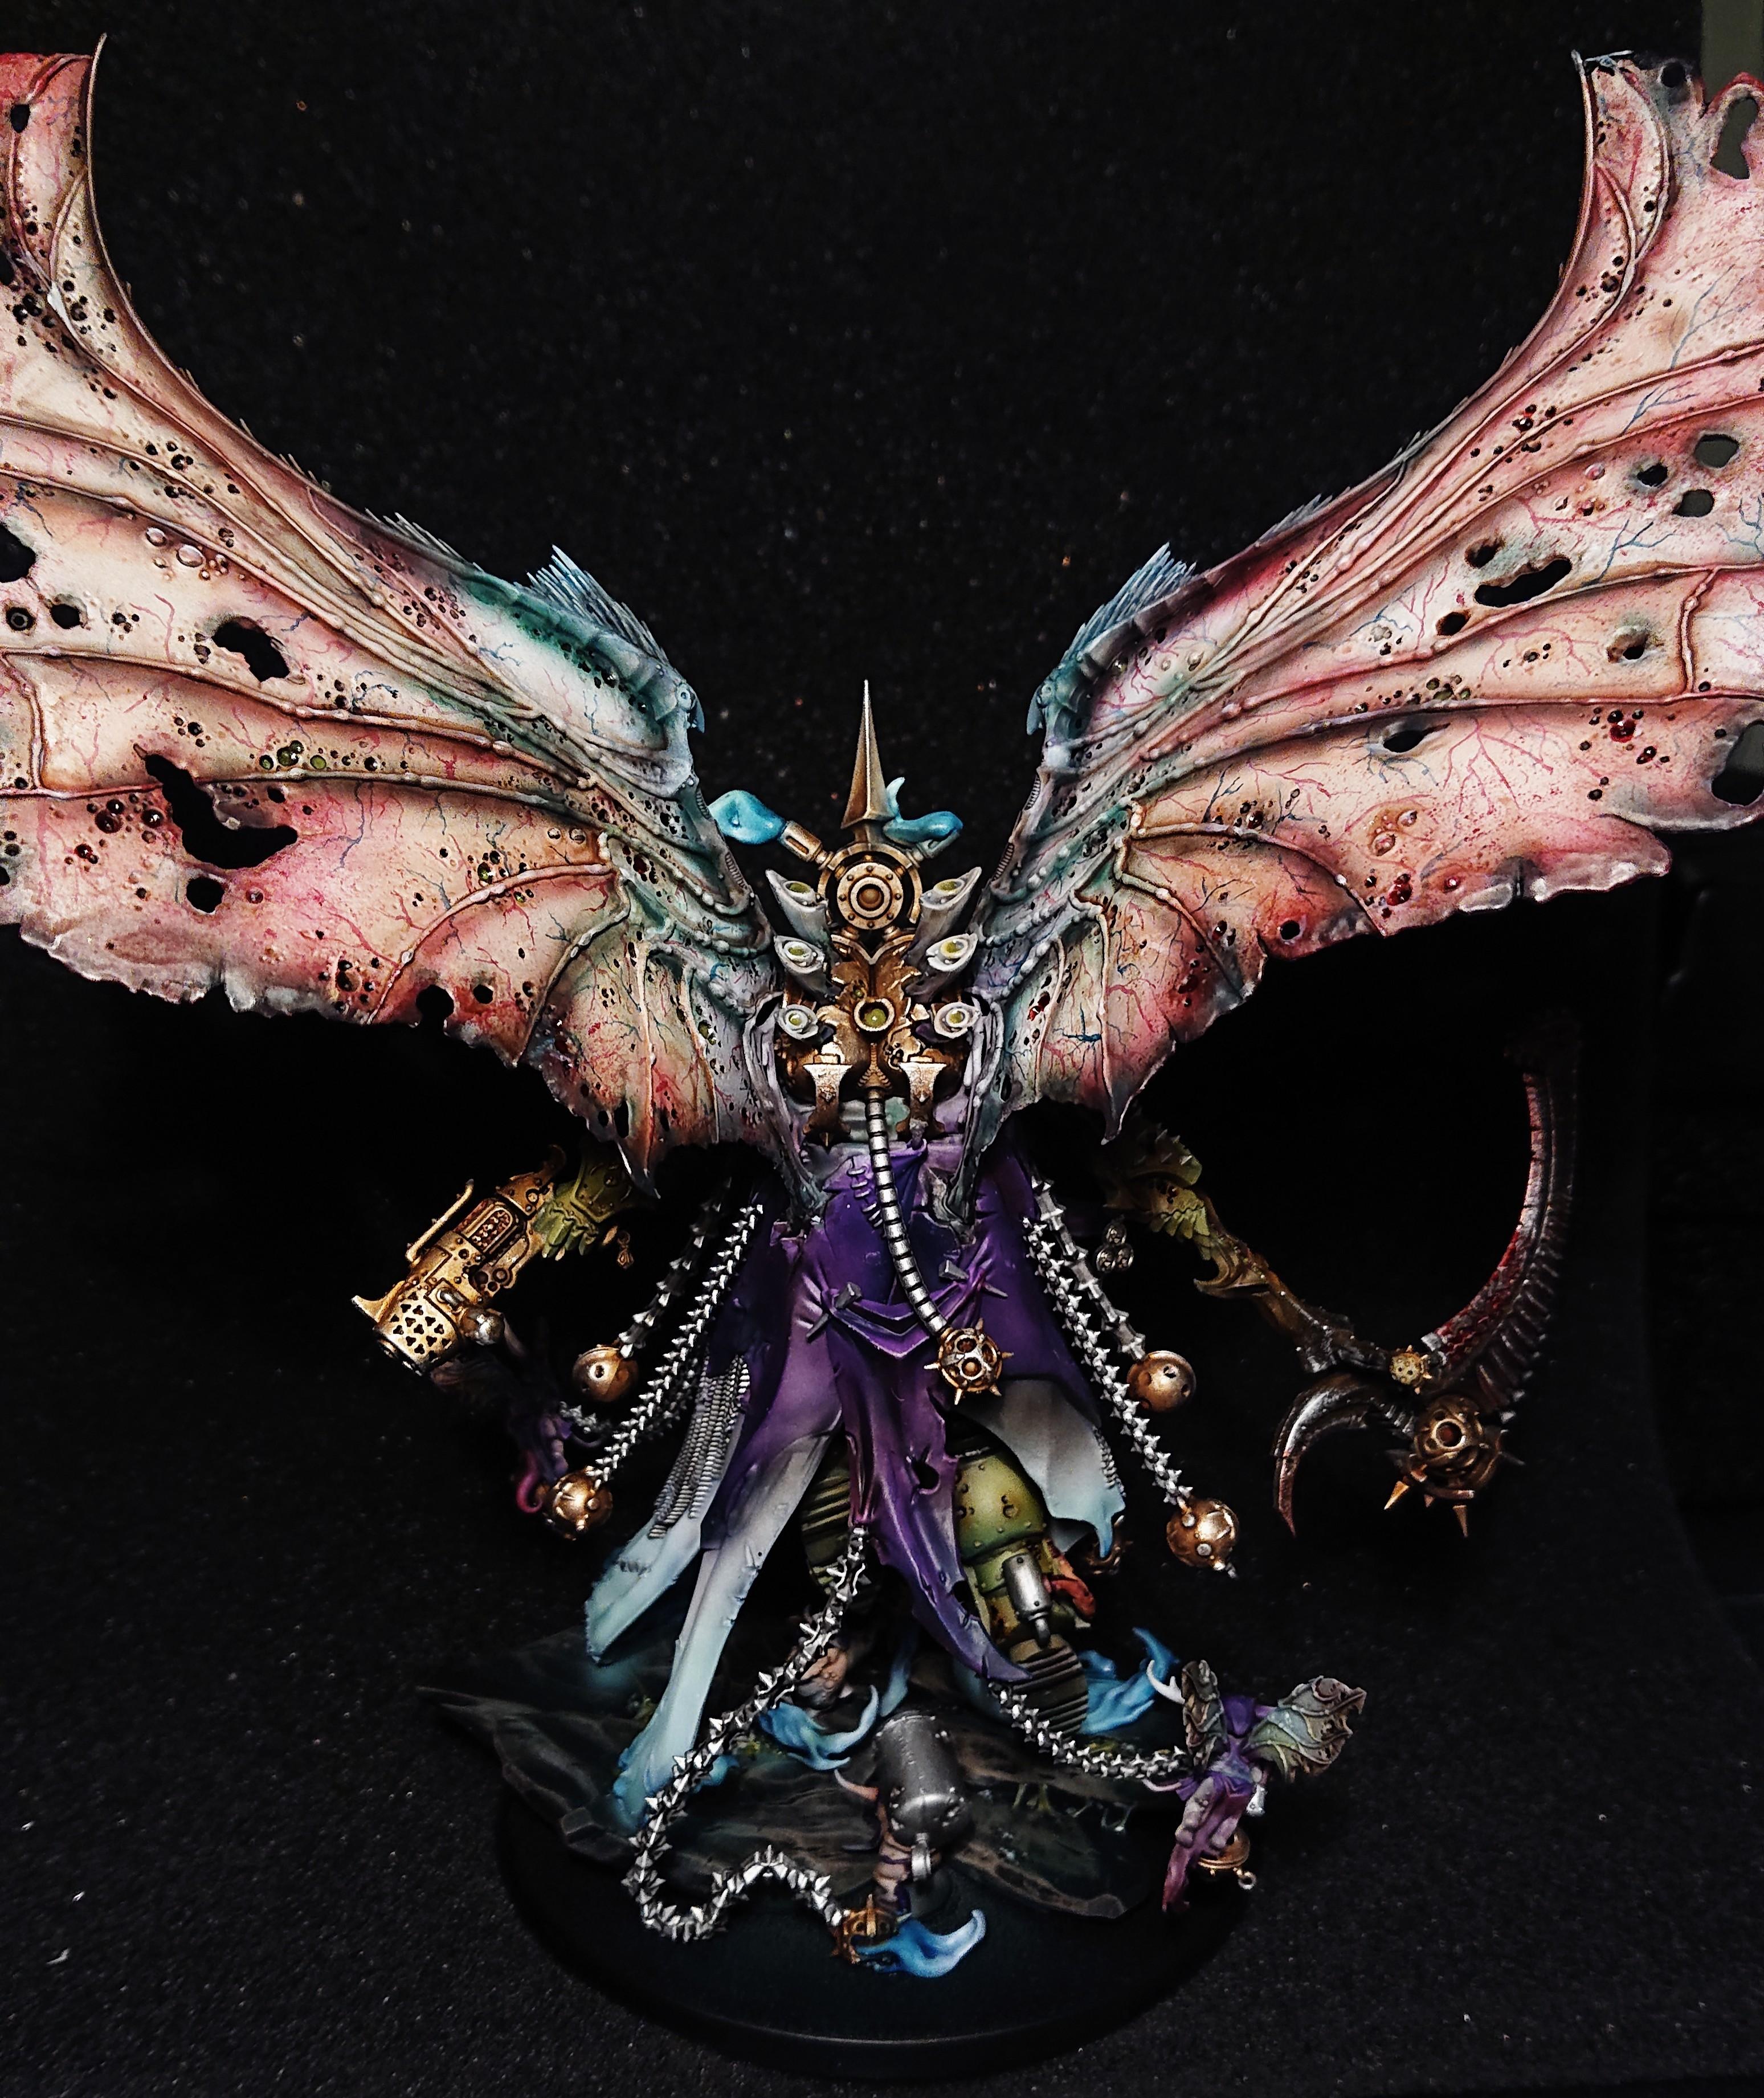 Angel, Chaos, Daemons, Death Guard, Mortarion, Nurgle, Primark, Winged